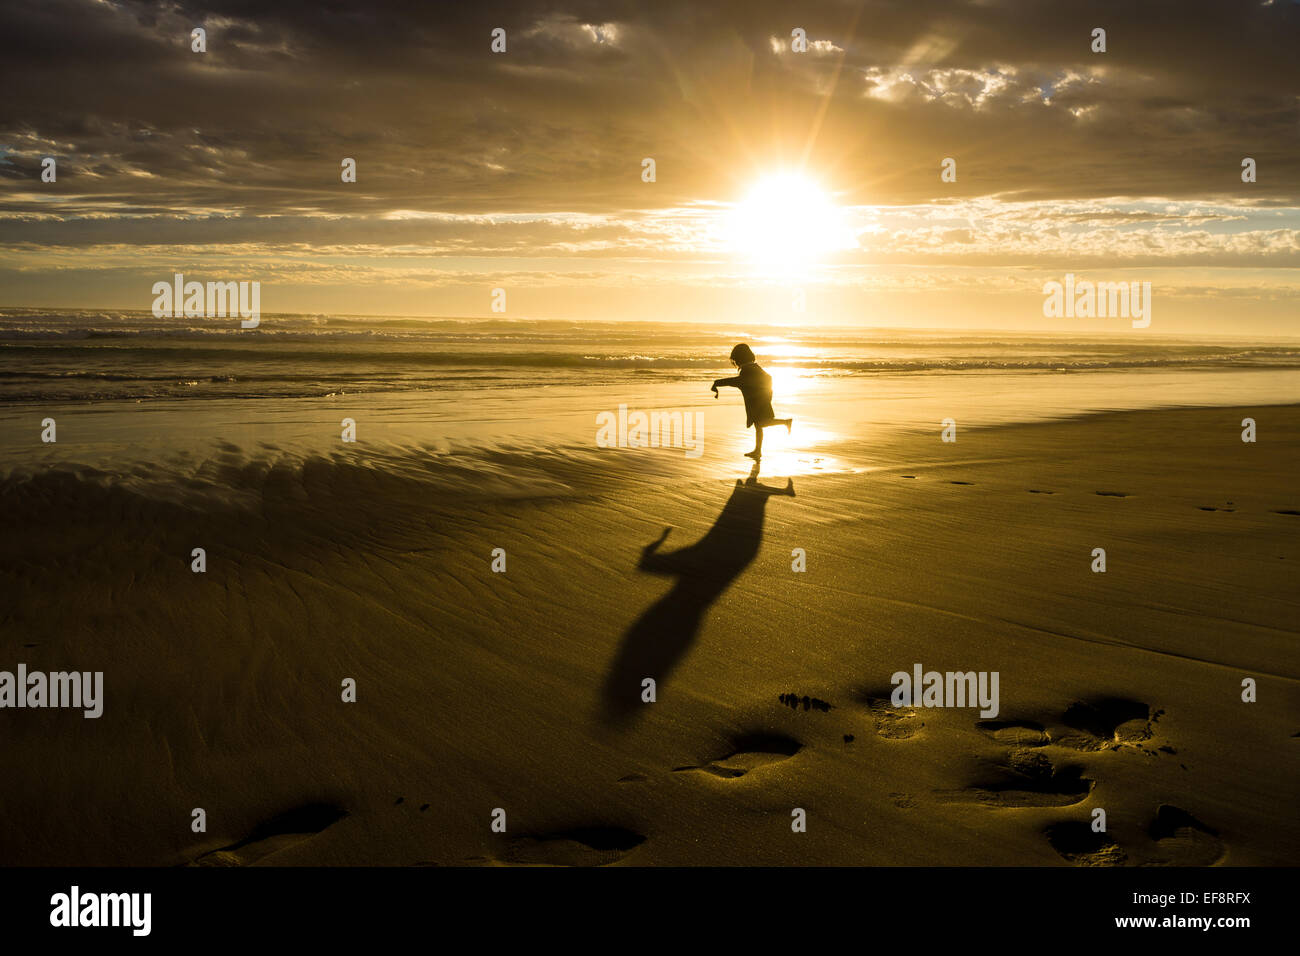 Australia, Melbourne, Silhouette of young girl dancing on beach at sunset Stock Photo